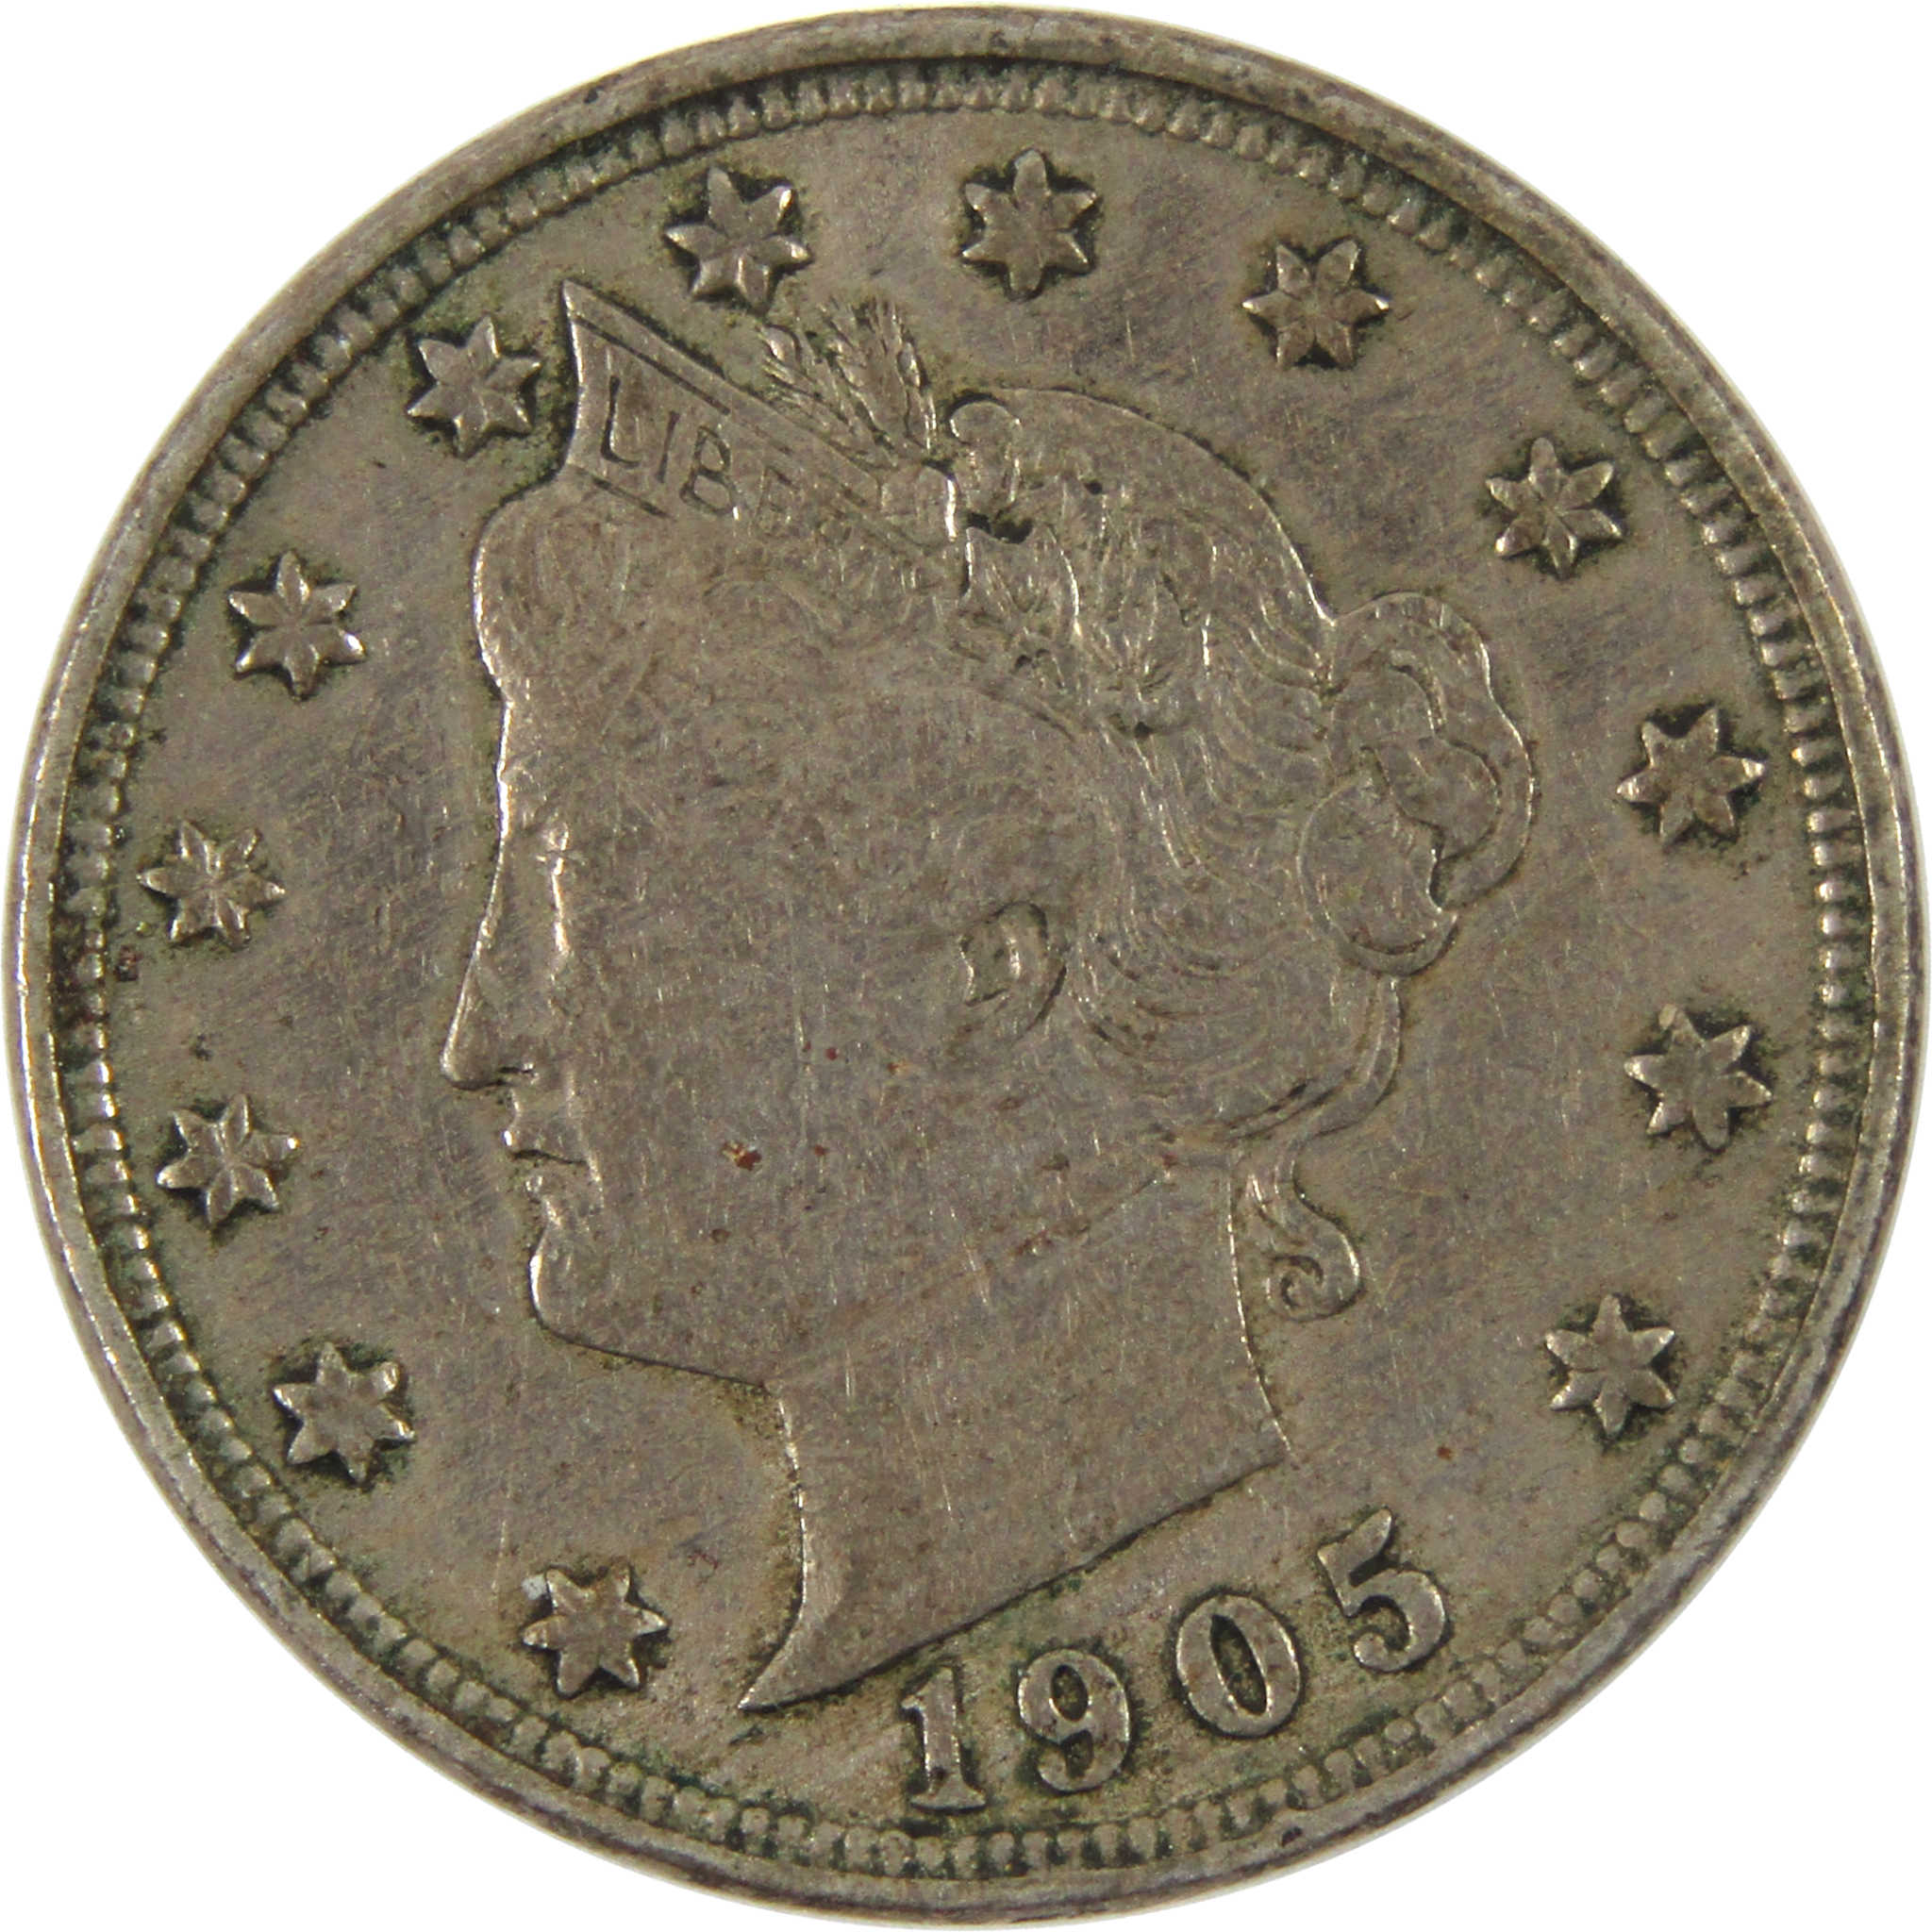 1905 Liberty Head V Nickel XF EF Extremely Fine 5c Coin SKU:CPC3670